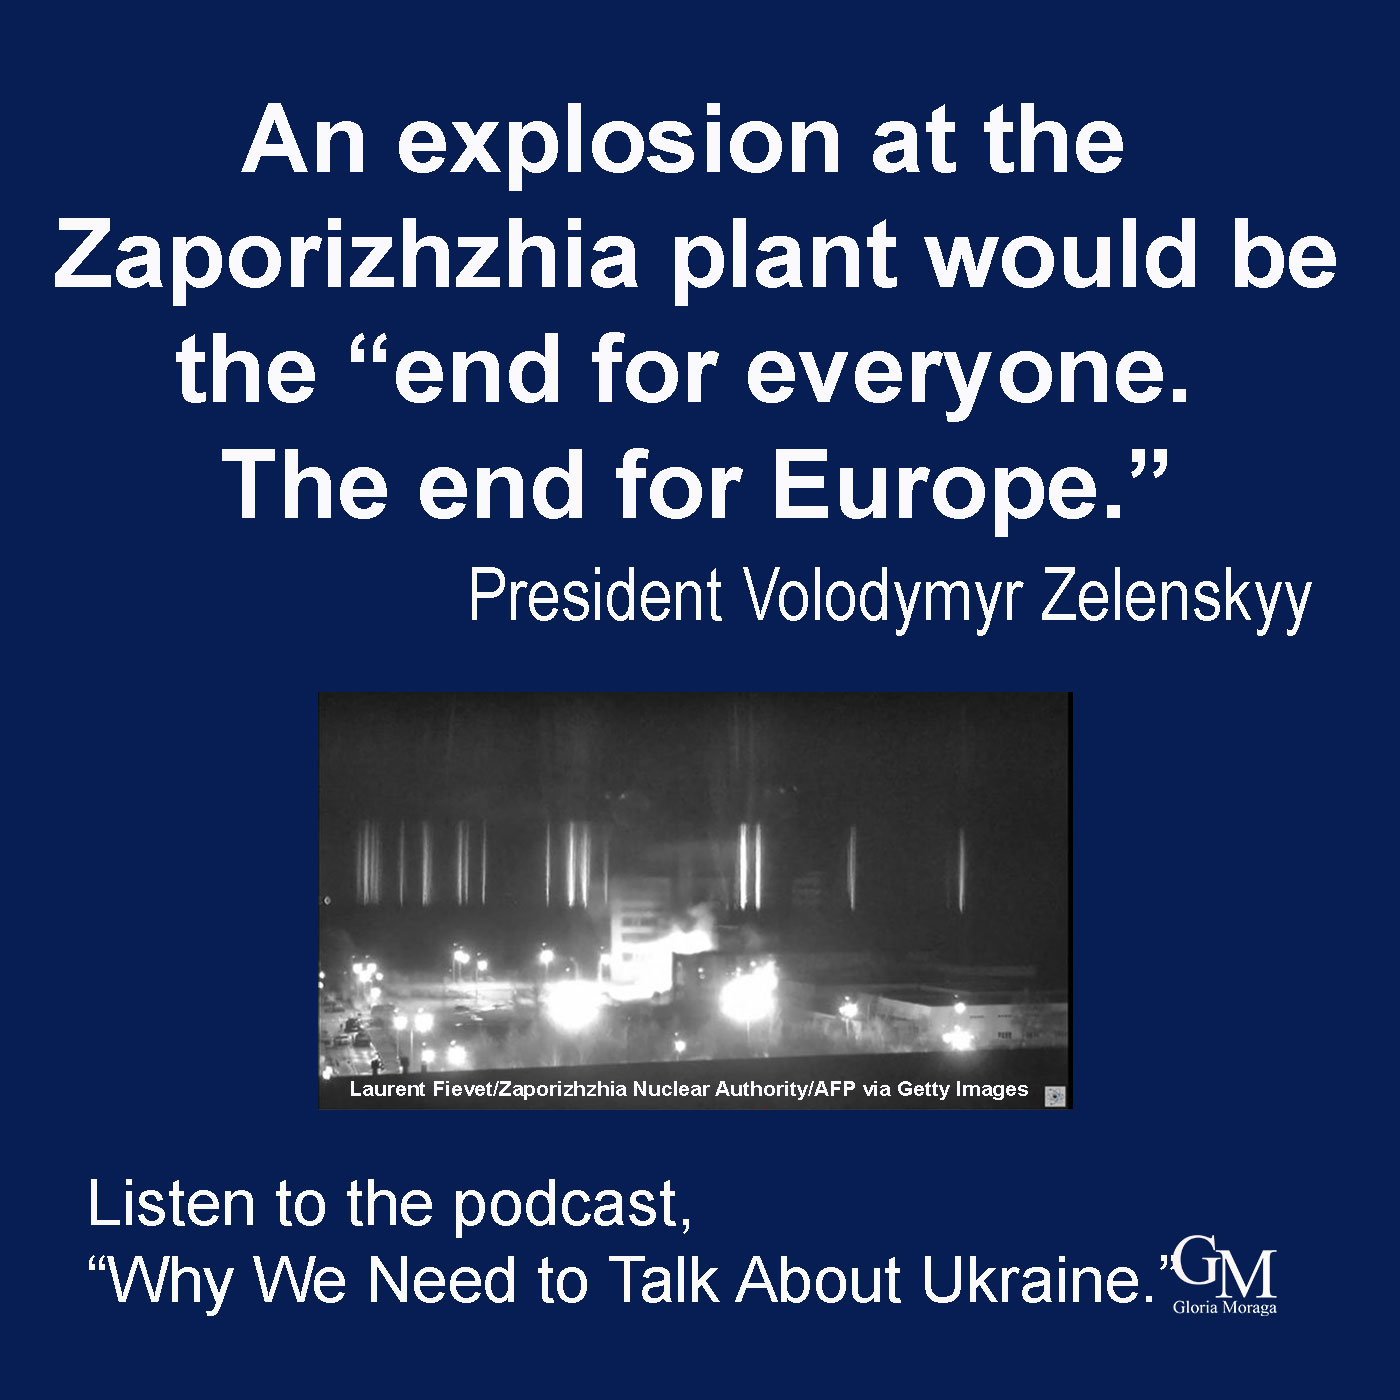 Blue background, white lettering, "An explosion at the Zaporizhzhia plant would be the "end for everyone. The end for Europe. President Volodymyr Zelenskyy. Image is of Zaporizhzhia nuclear power plant. Underneath photo image this word, listen to the podcast, "Why We Need To Talk about Ukraine." GM logo in the right corner